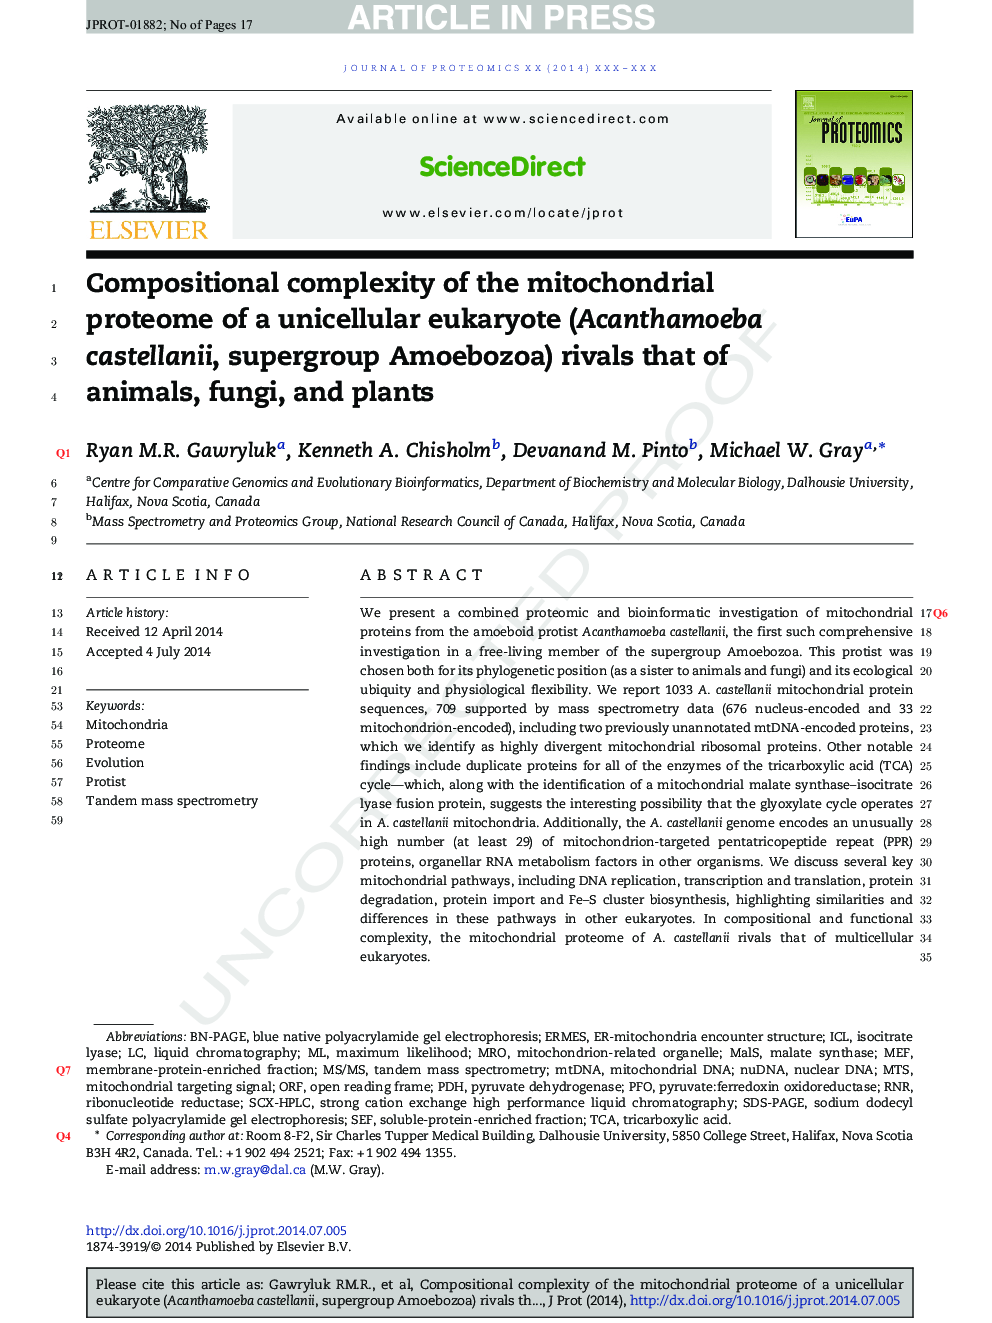 Compositional complexity of the mitochondrial proteome of a unicellular eukaryote (Acanthamoeba castellanii, supergroup Amoebozoa) rivals that of animals, fungi, and plants